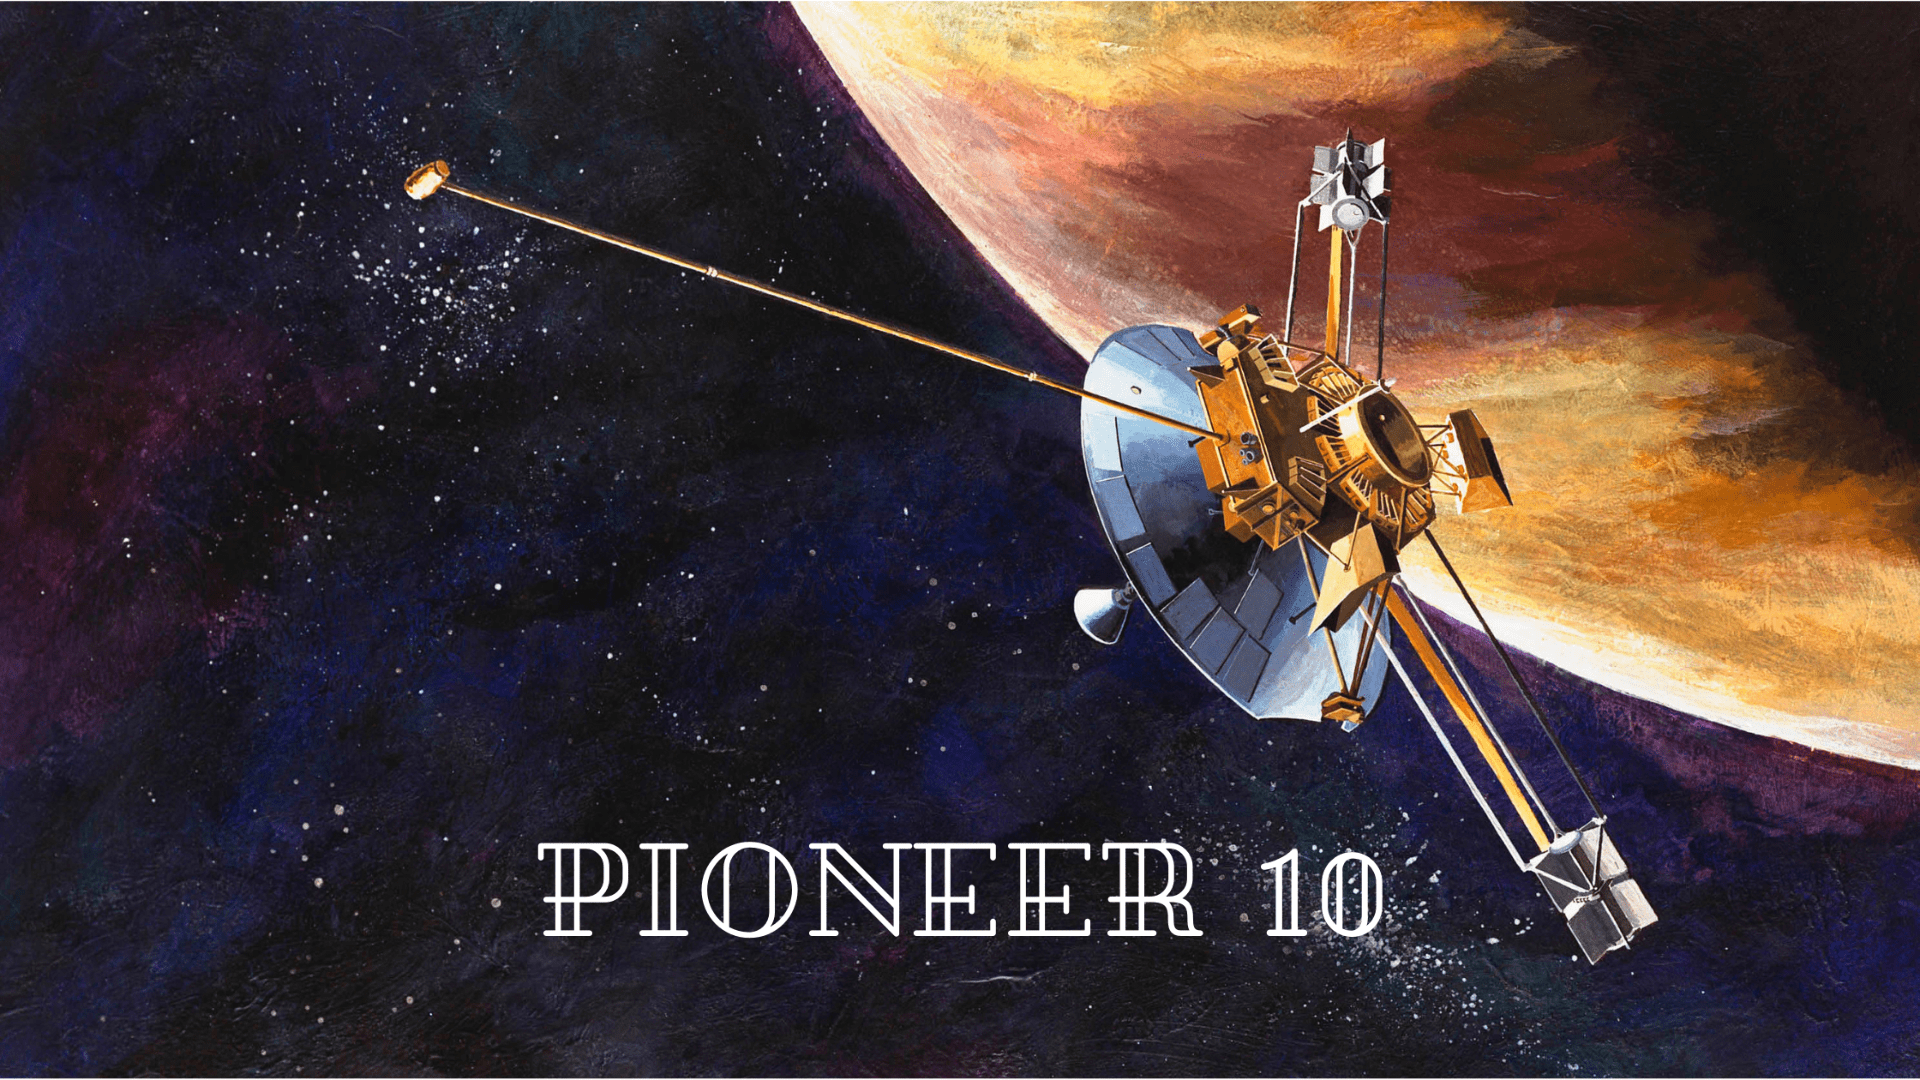 Artists concept of Pioneer with Jupiter